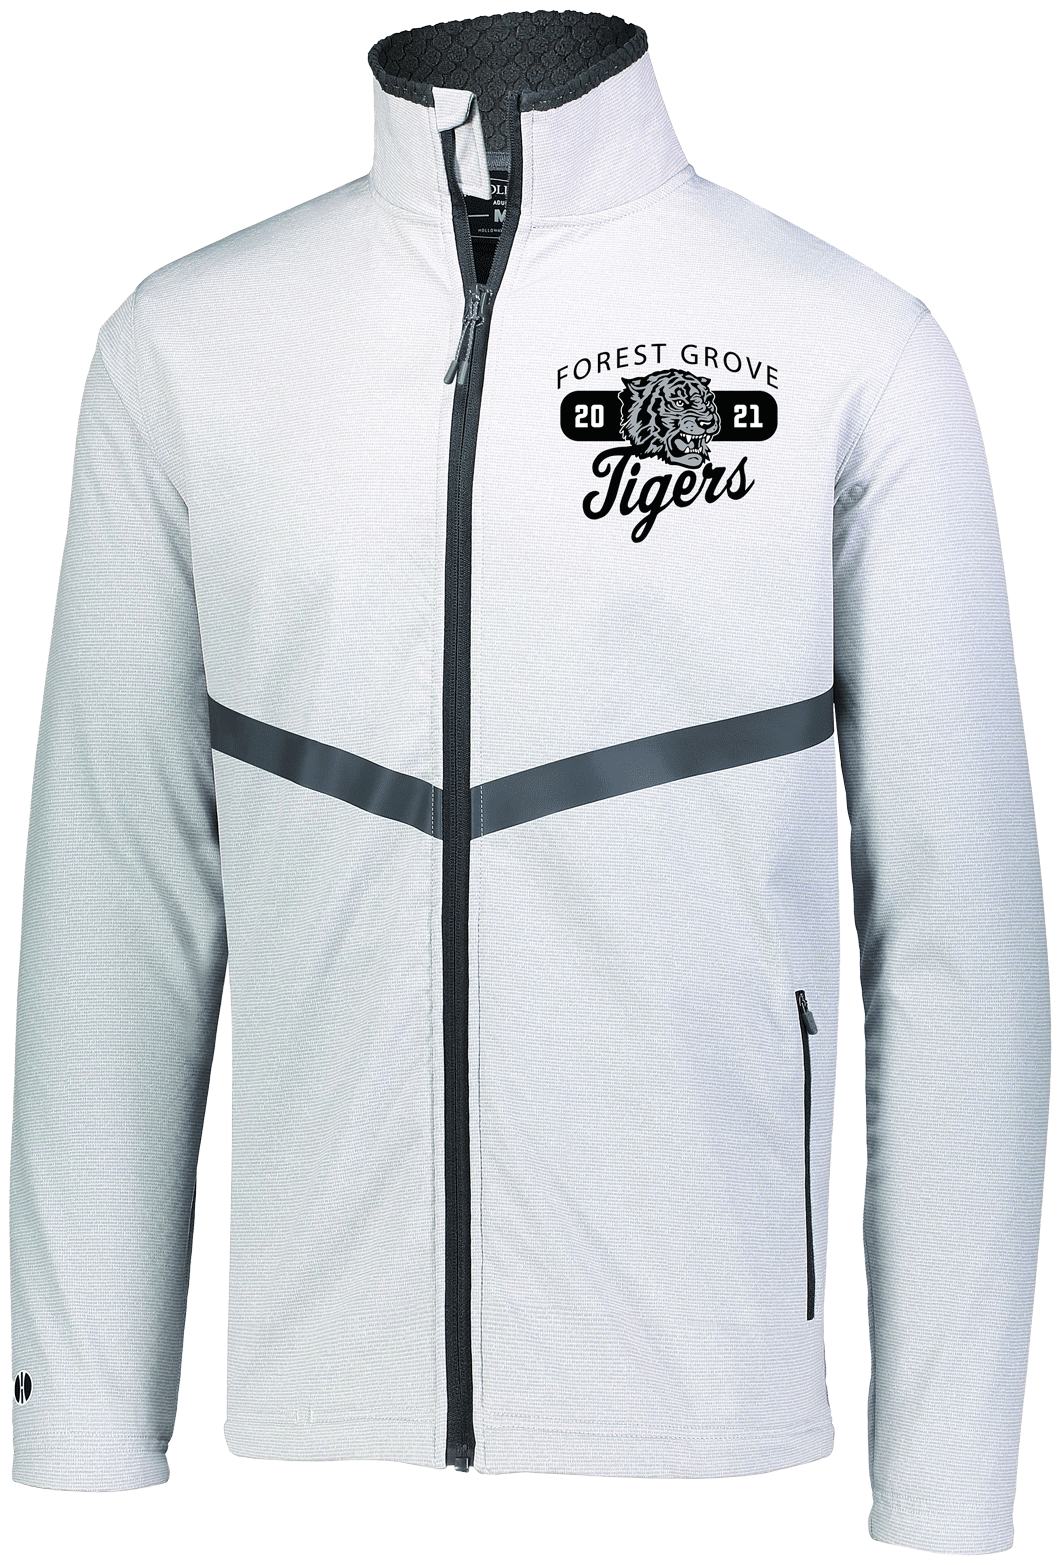 White zip up jacket featuring Columbus OH custom embroidery